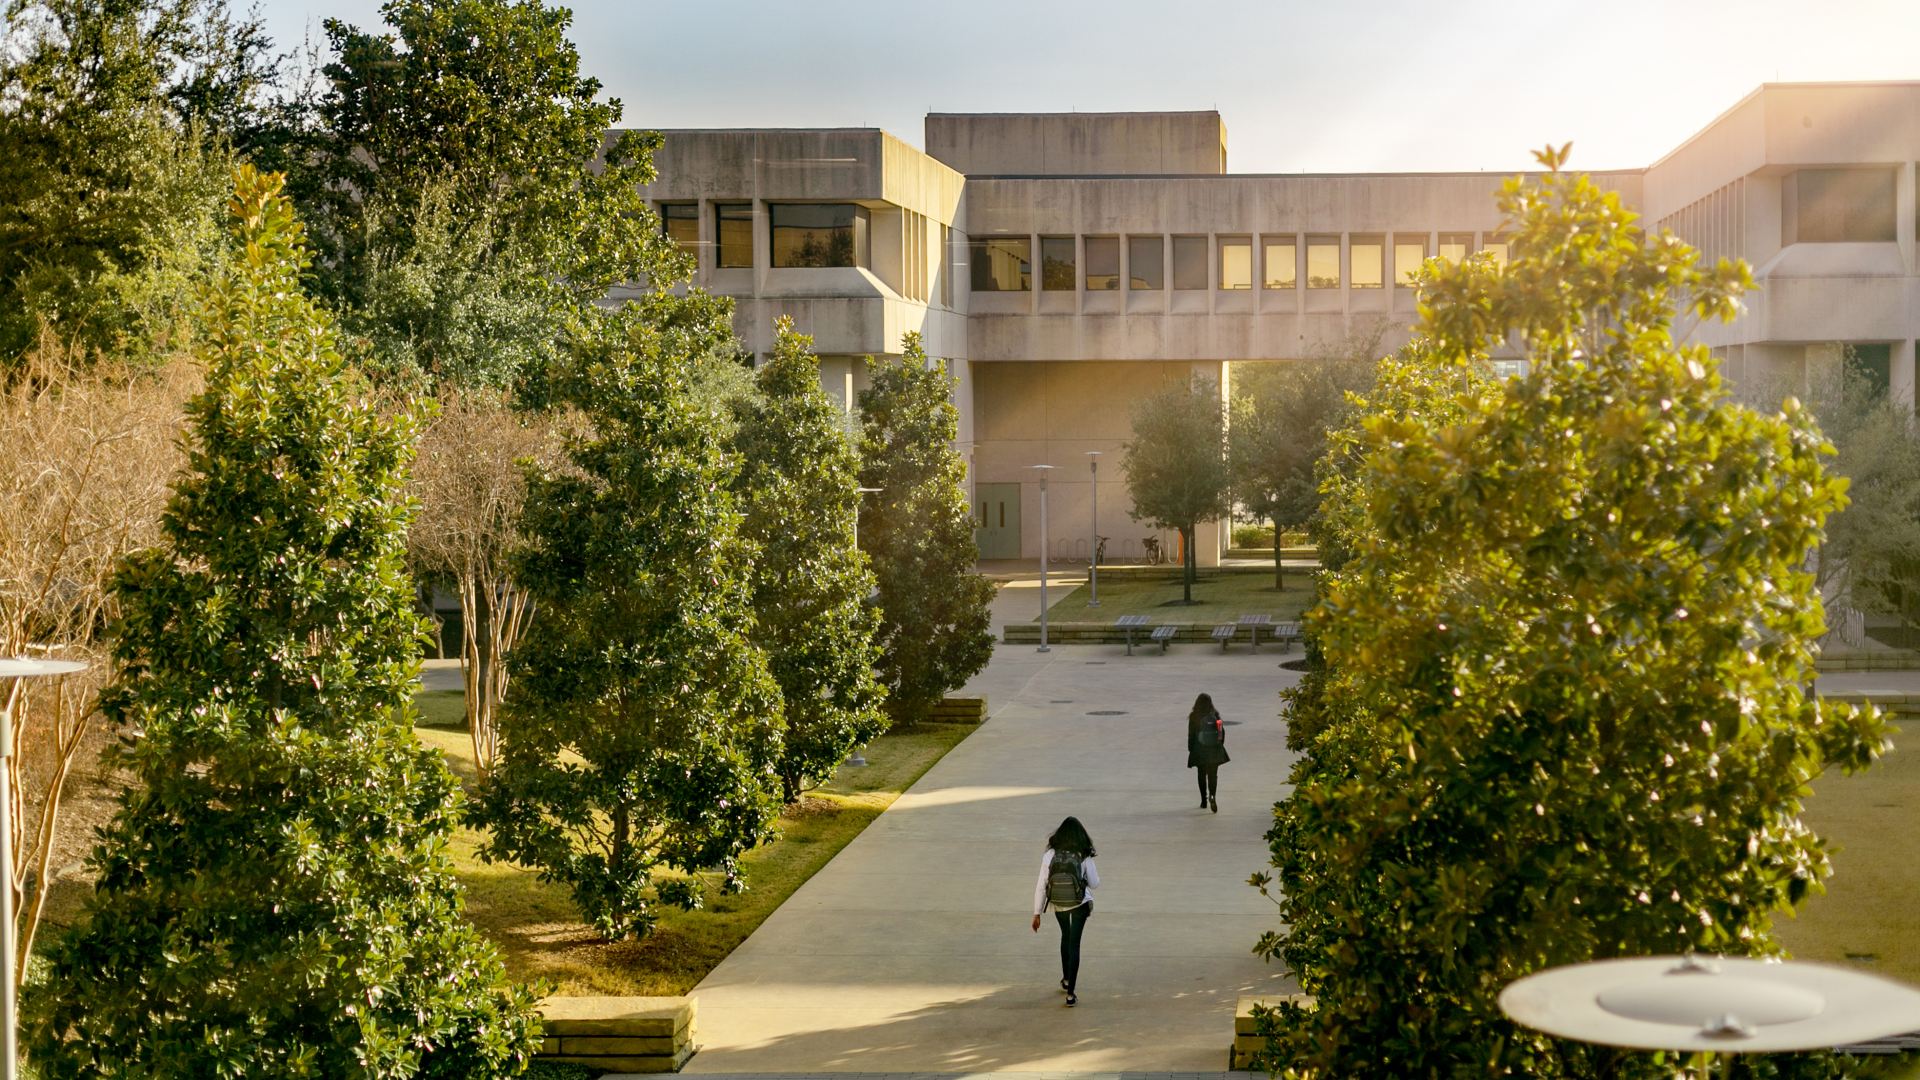 An overhead shot of students walking down the main path to the Administration Building, which is lined with full trees. Golden sunlight brightens the scene.